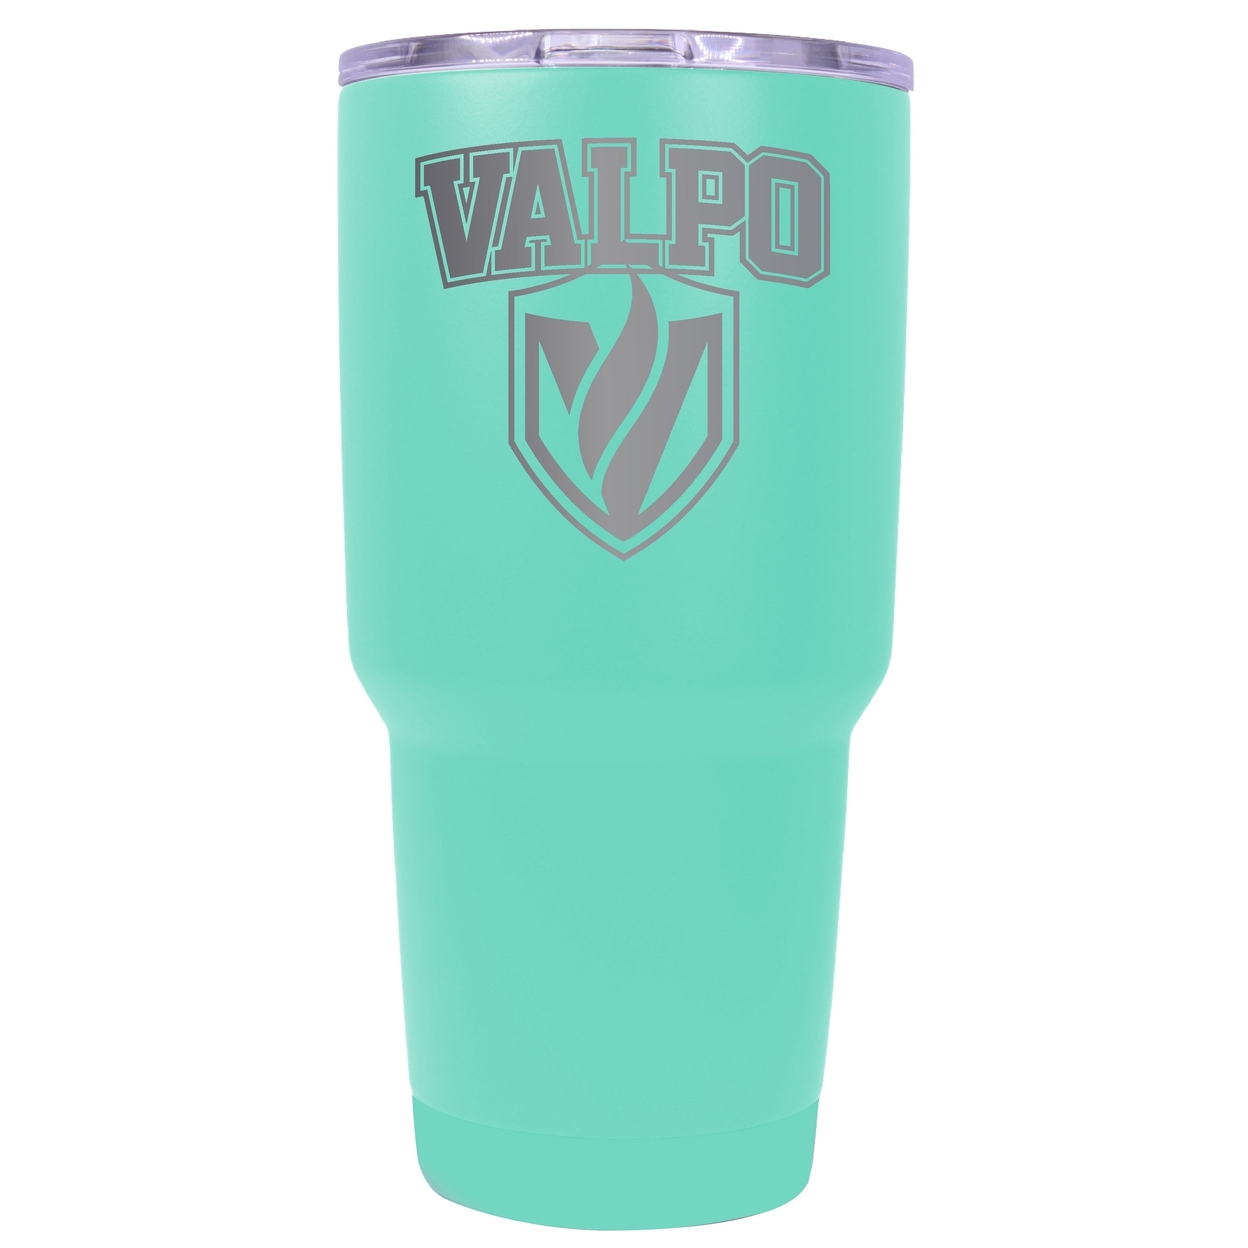 Winston Salem State 24 Oz Laser Engraved Stainless Steel Insulated Tumbler - Choose Your Color. - Seafoam